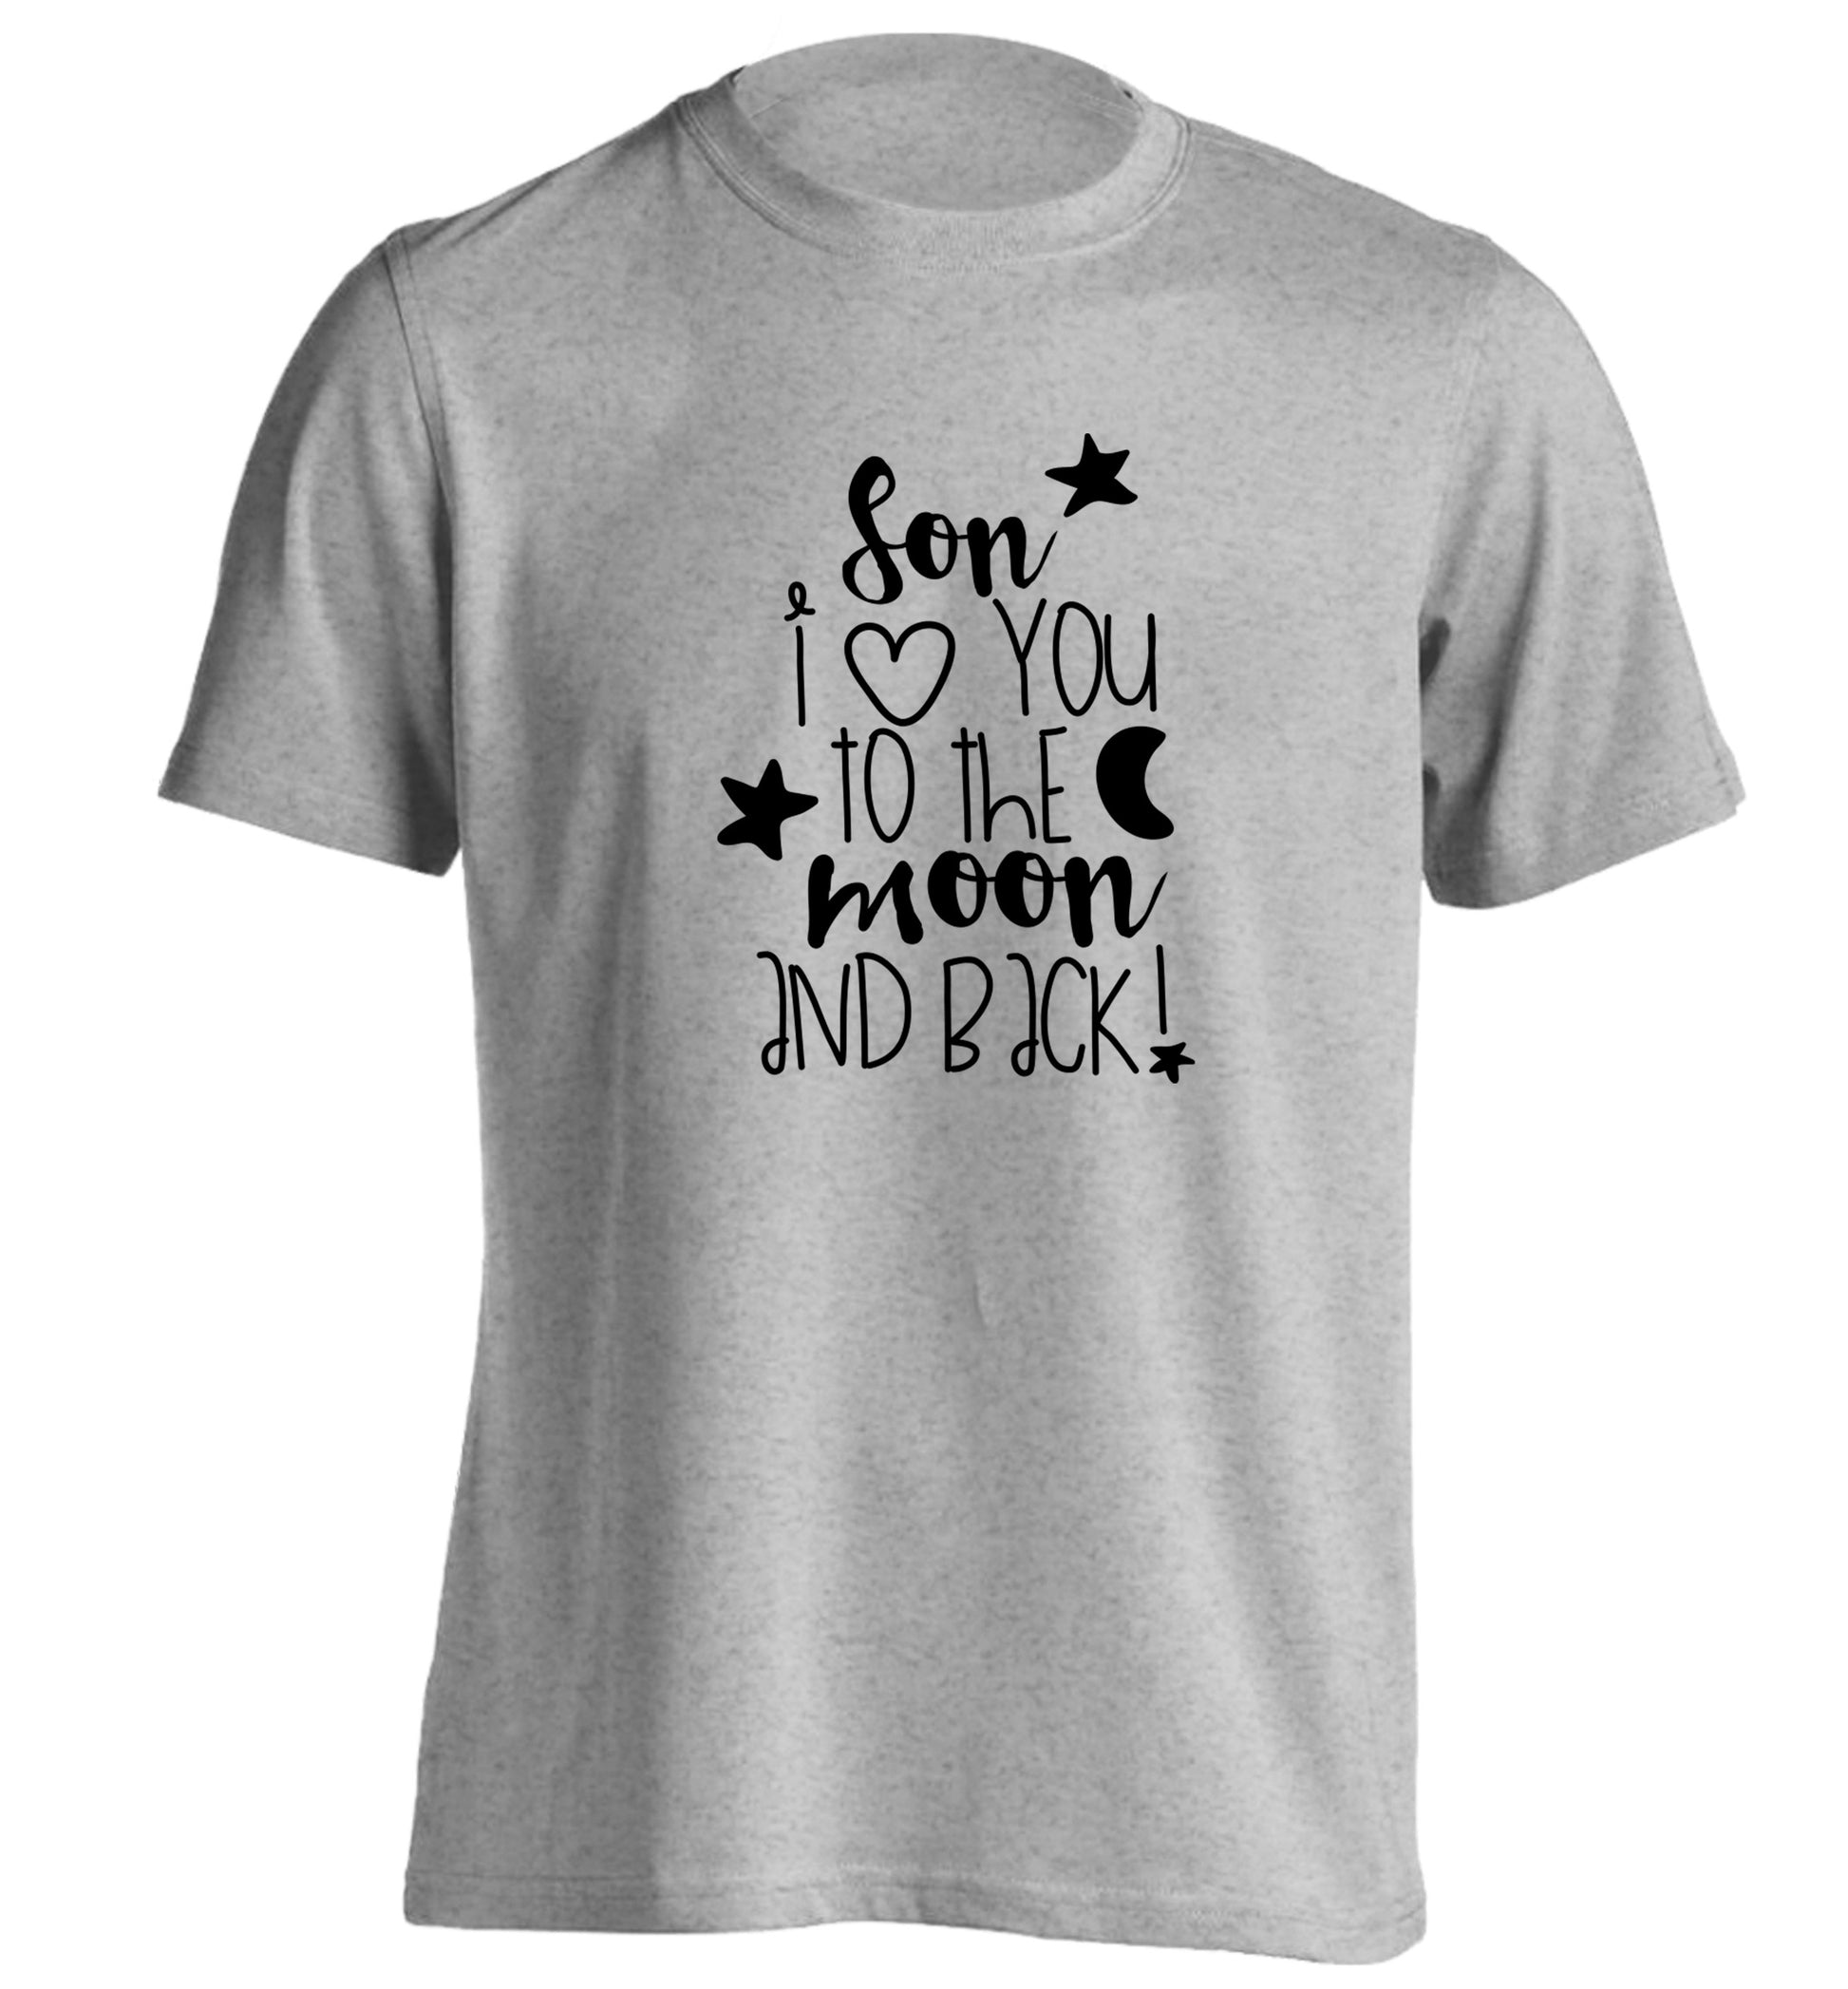 Son I love you to the moon and back adults unisex grey Tshirt 2XL